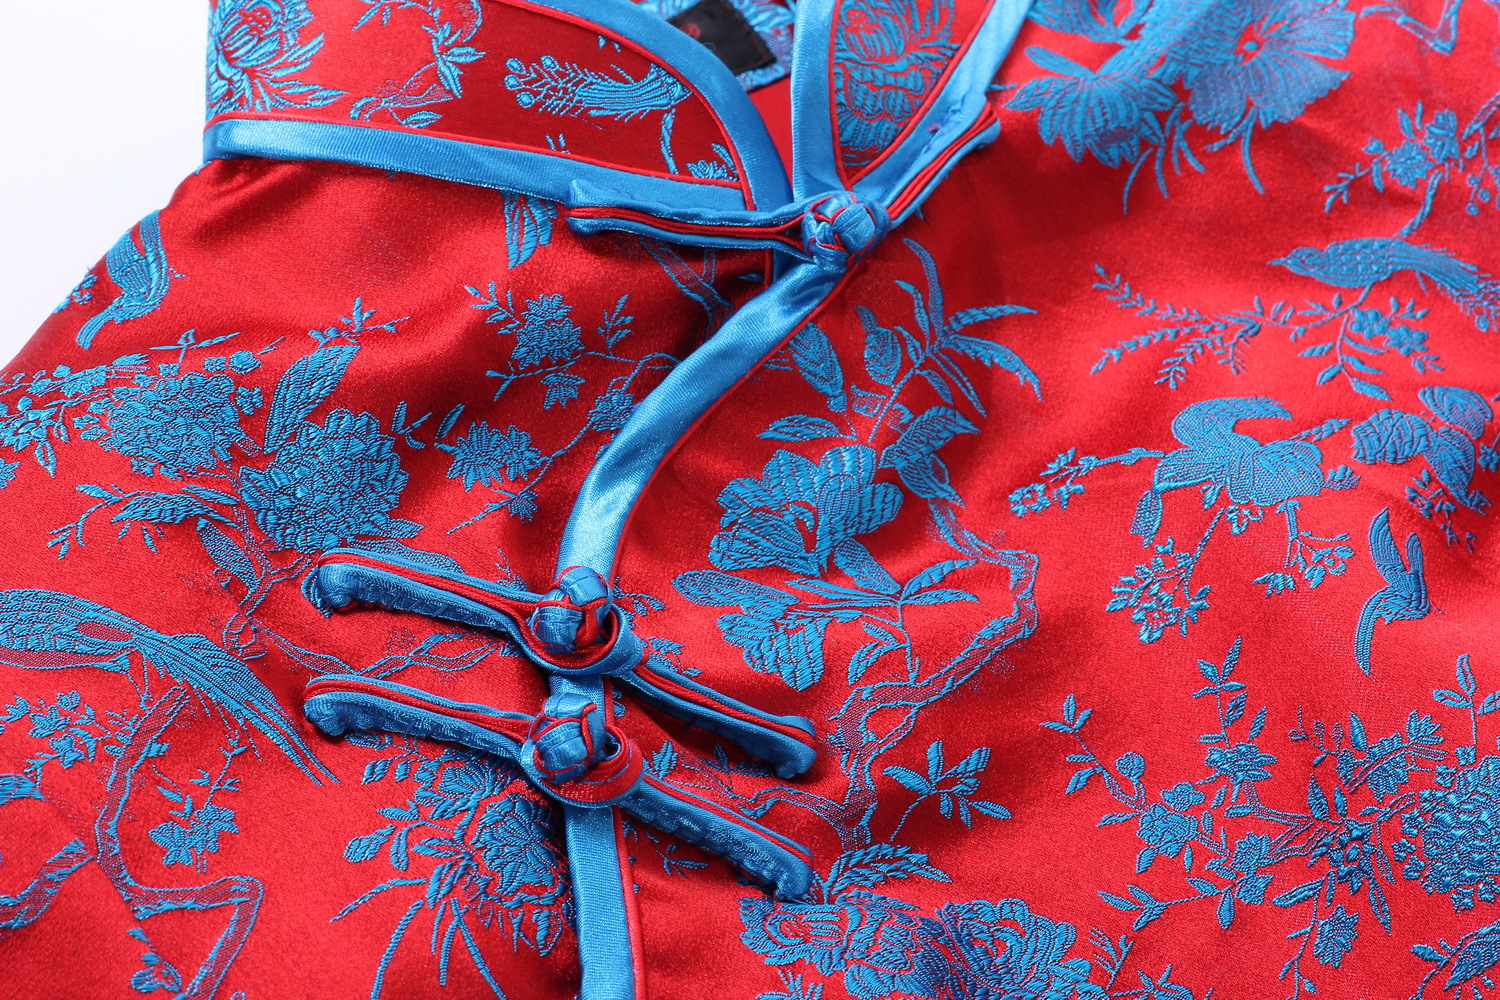 Blue-traditional-floral-pattern-red-silk-brocade-qipao-Chinese-3-quarter-long-sleeves-cheongsam-dress-007